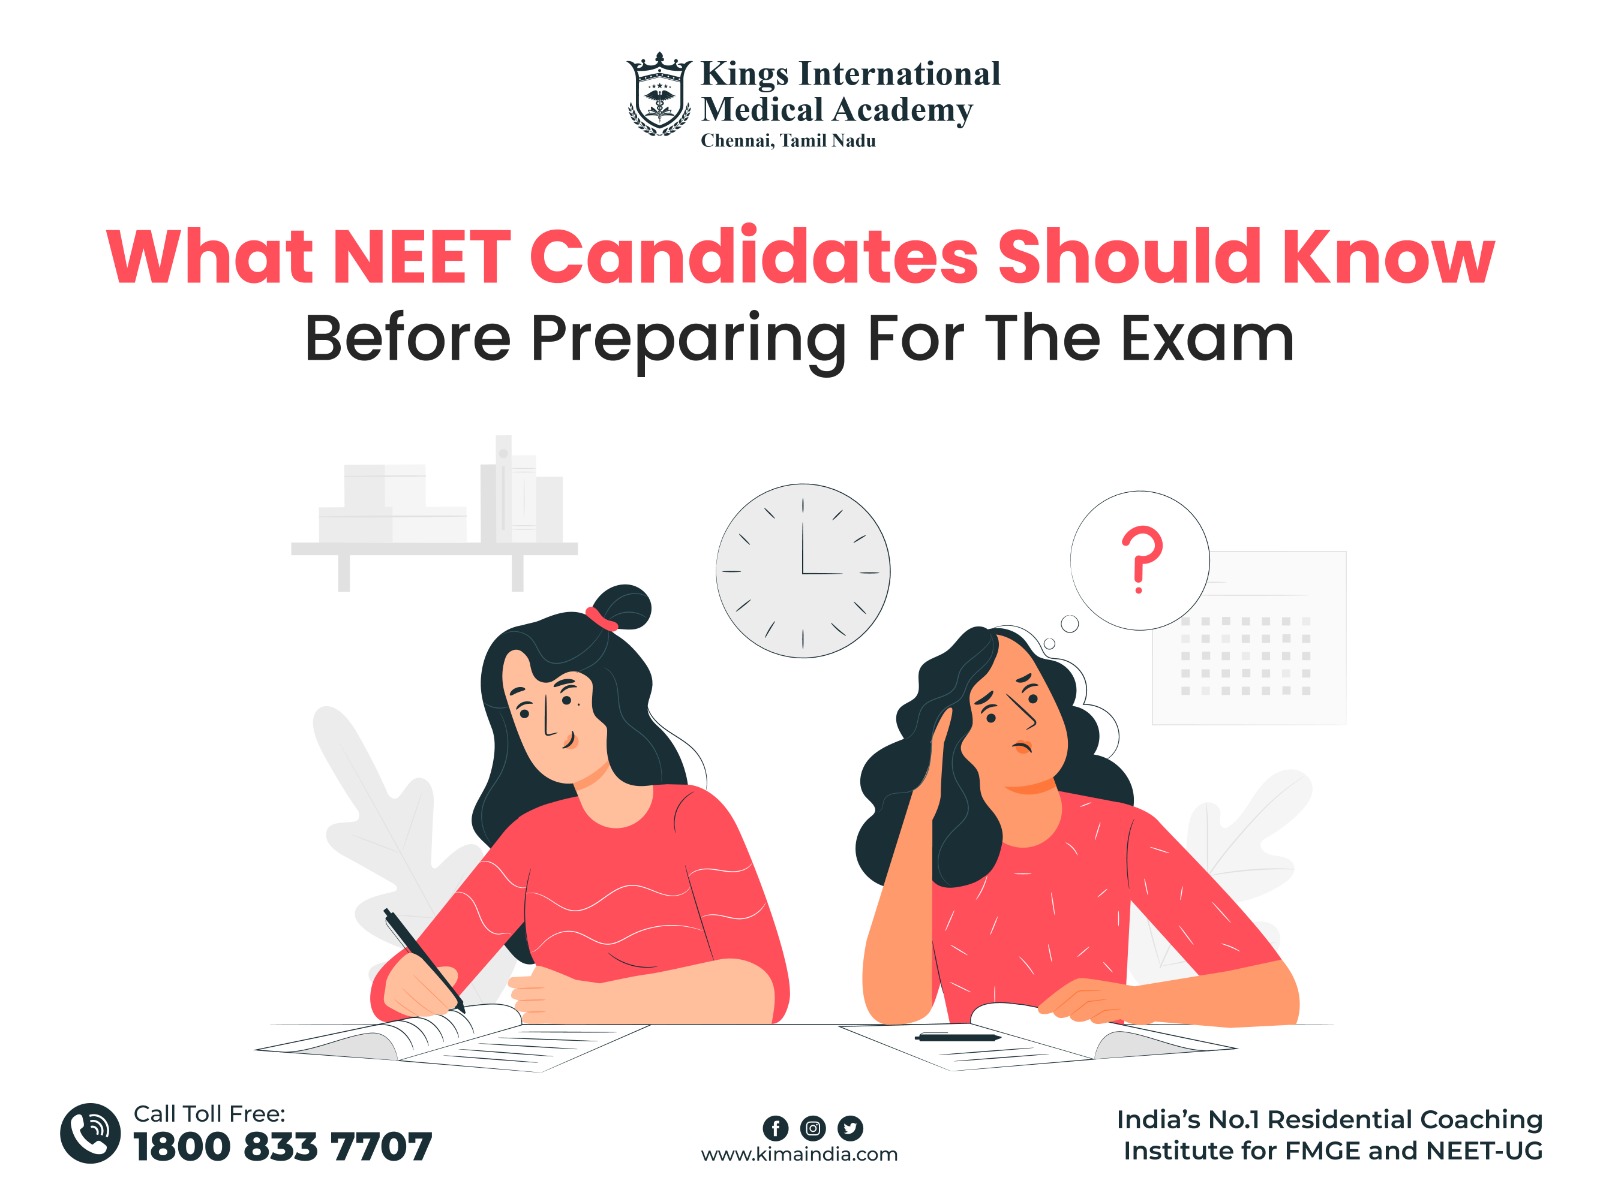 What NEET Candidates Should Know before Preparing for the exam